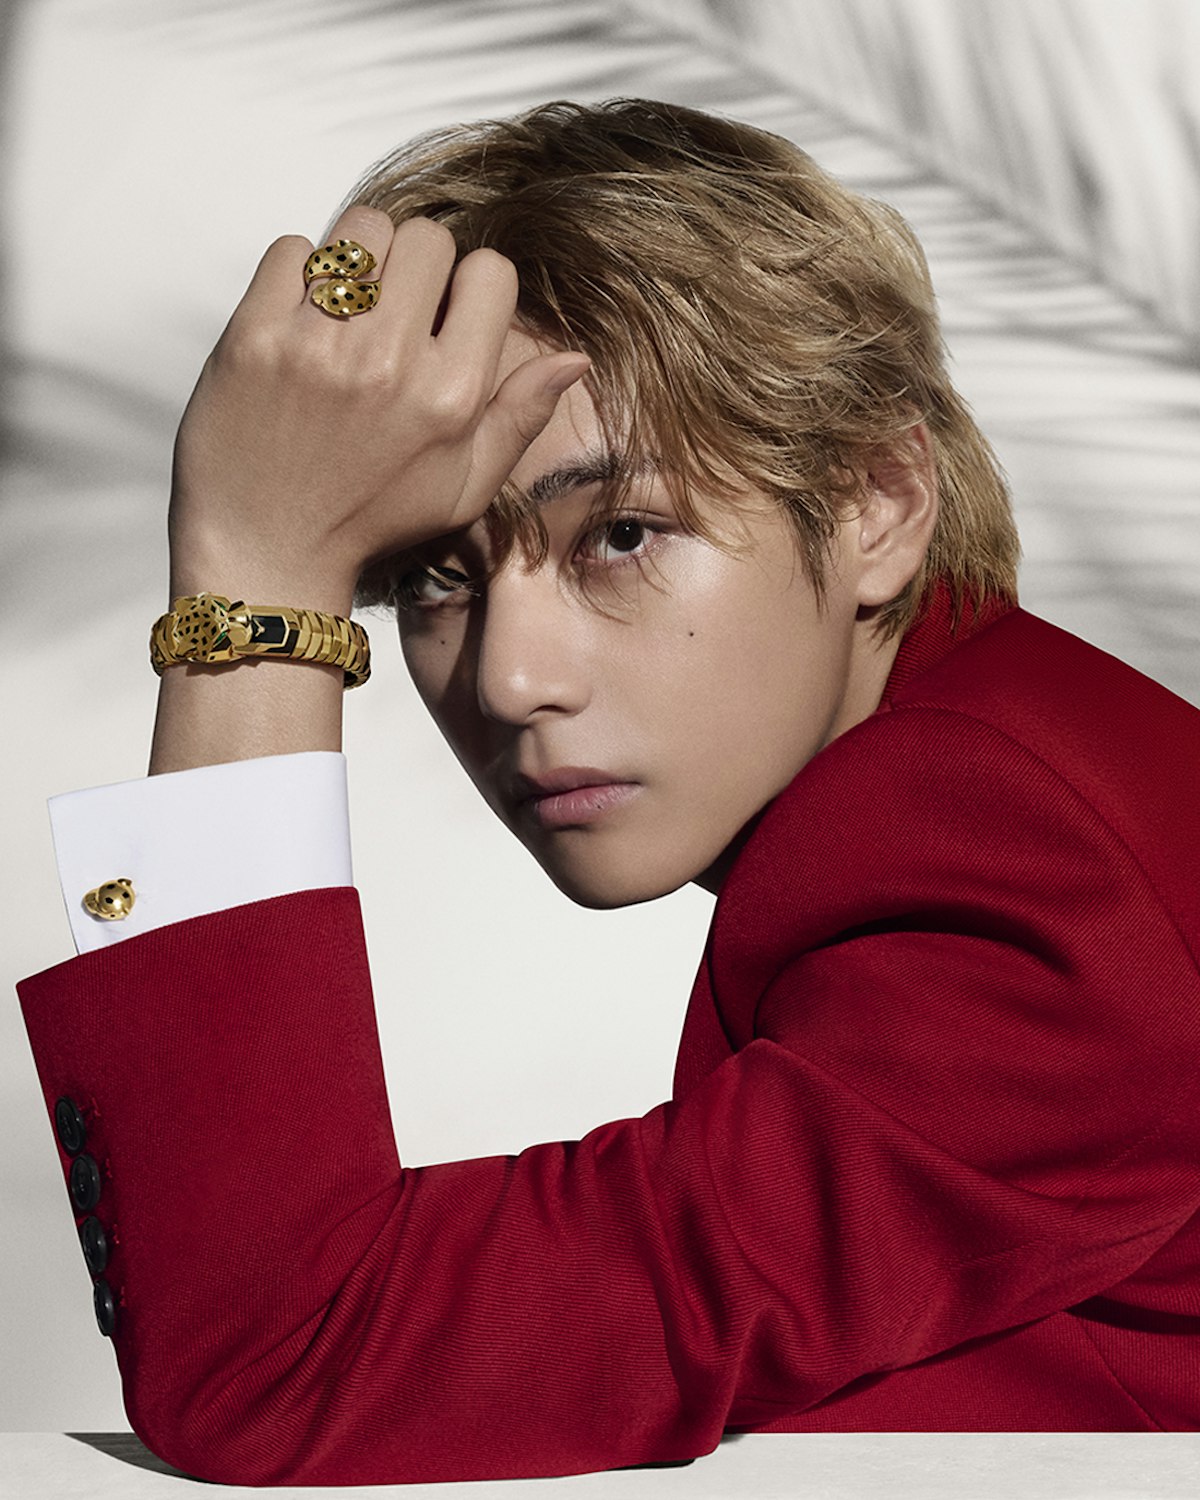 BTS' V joins luxury jewellery house Cartier as their global